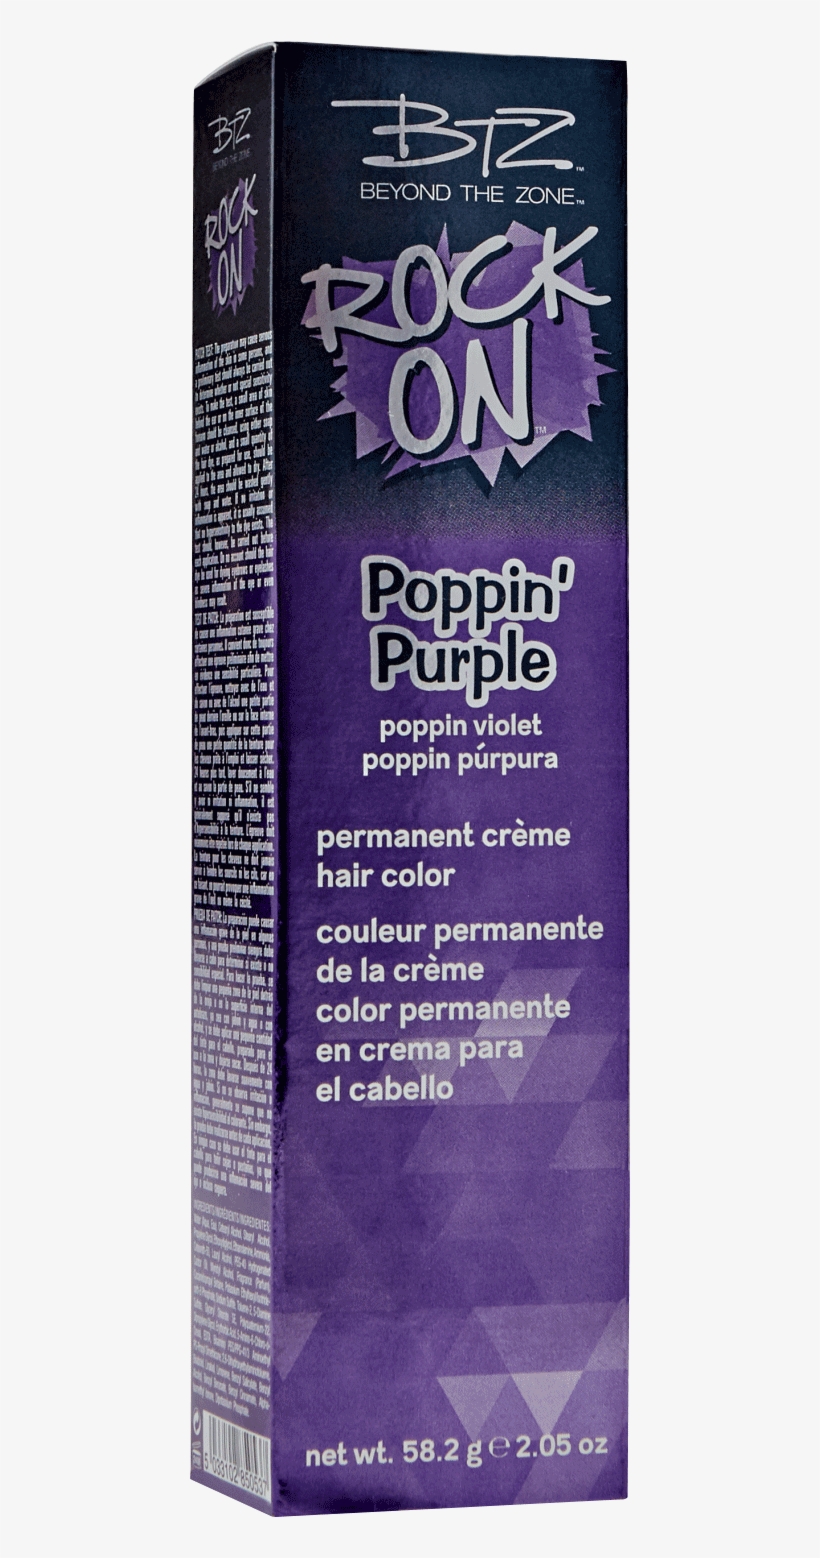 Beyond The Zone Poppin Purple Permanent Creme Hair - Btz Rock On Poppin Purple, transparent png #2162717